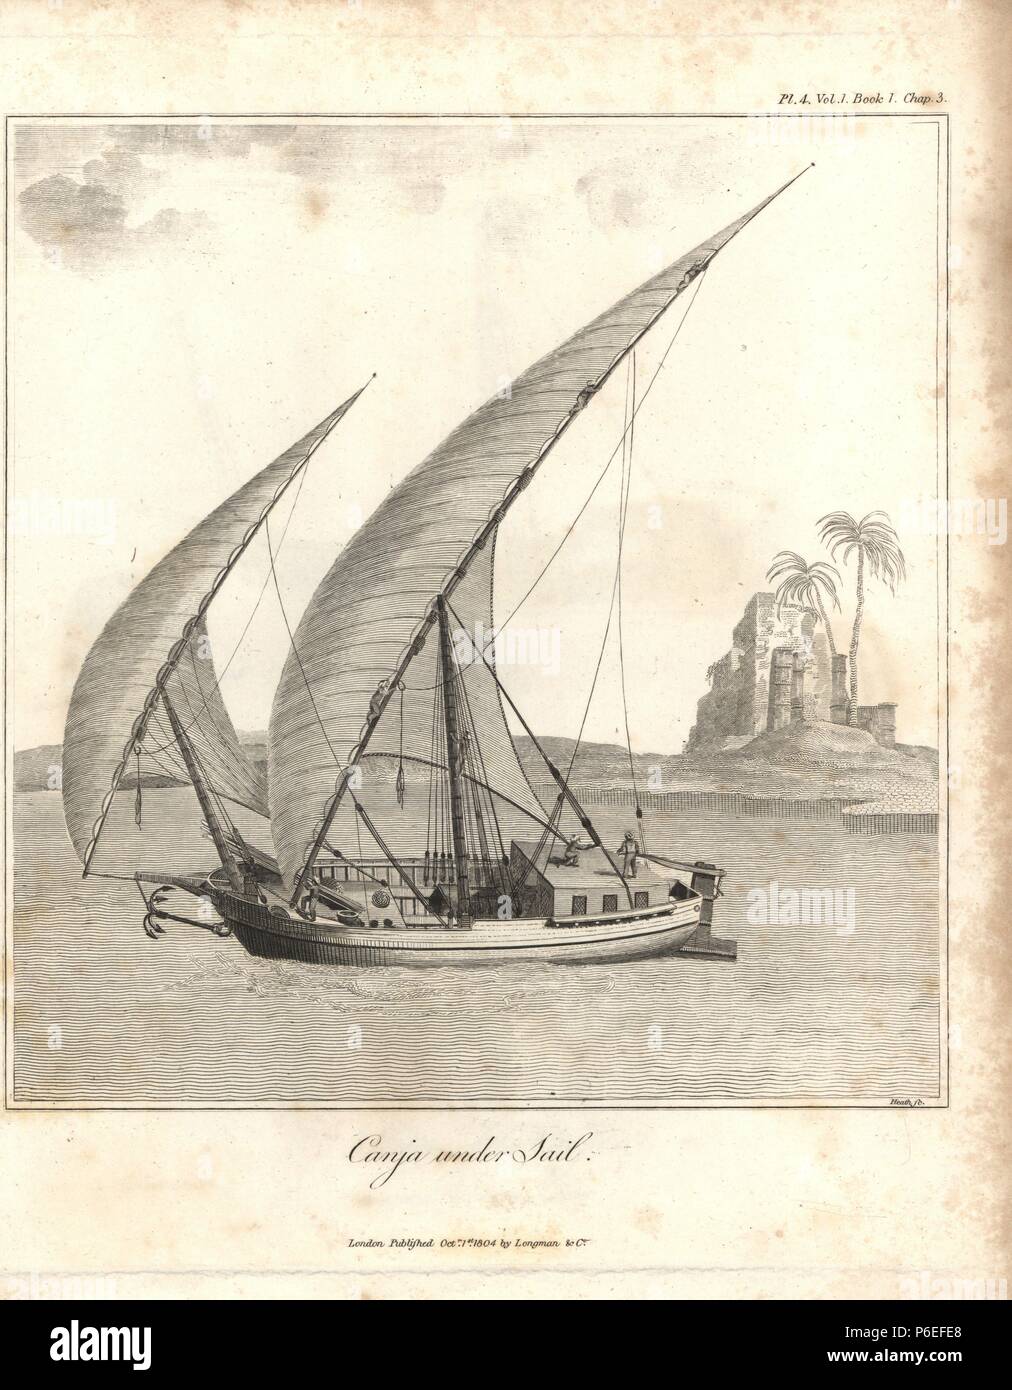 Egyptian Canja under sail. Copperplate engraving from James Bruce's 'Travels to Discover the Source of the Nile, in the years 1768, 1769, 1770, 1771, 1772 and 1773,' London, 1790. James Bruce (1730-1794) was a Scottish explorer and travel writer who spent more than 12 years in North Africa and Ethiopia. Engraved by Heath after an original drawing by Bruce. Stock Photo